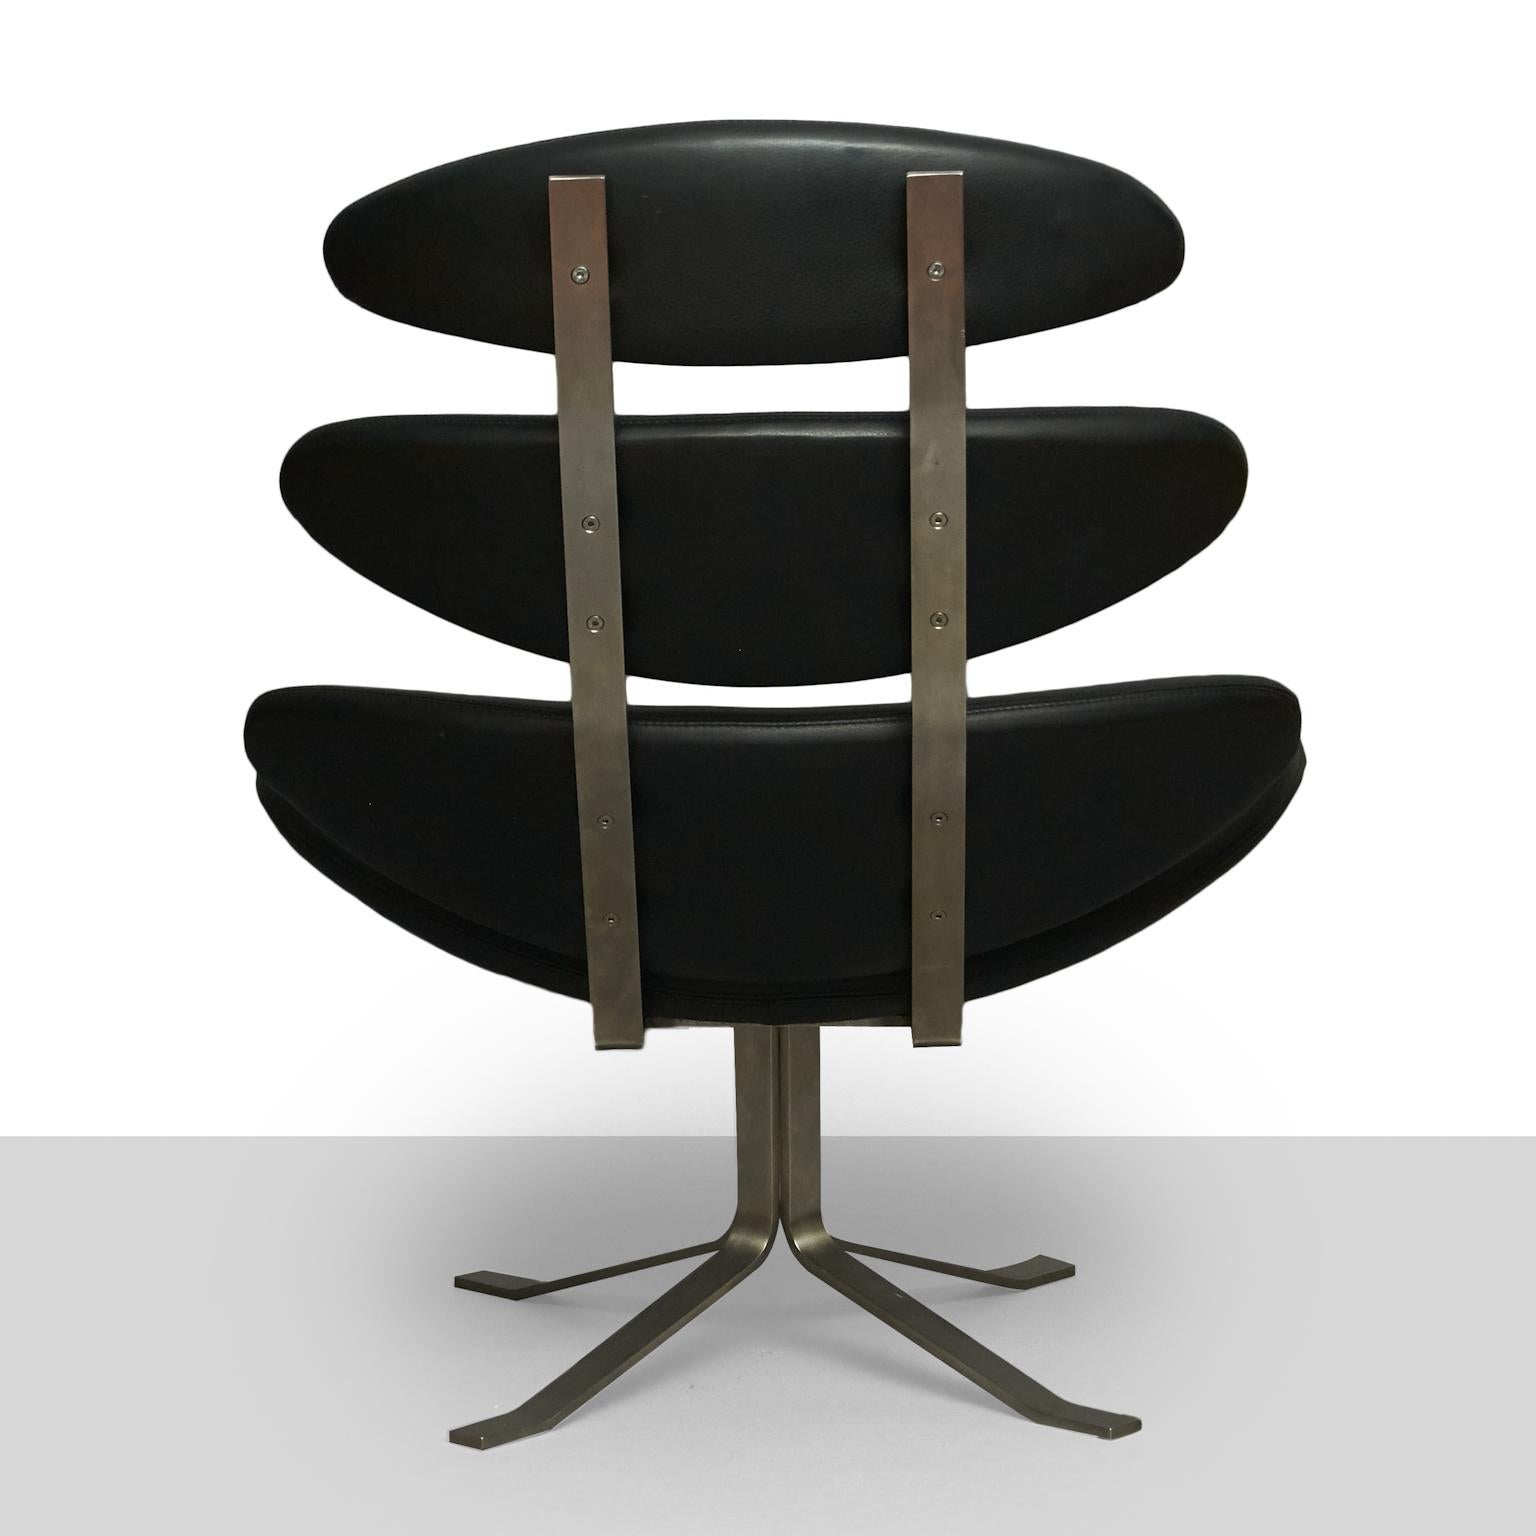 Mid-20th Century Corona Chair by Poul Volther for Erik Jorgensen